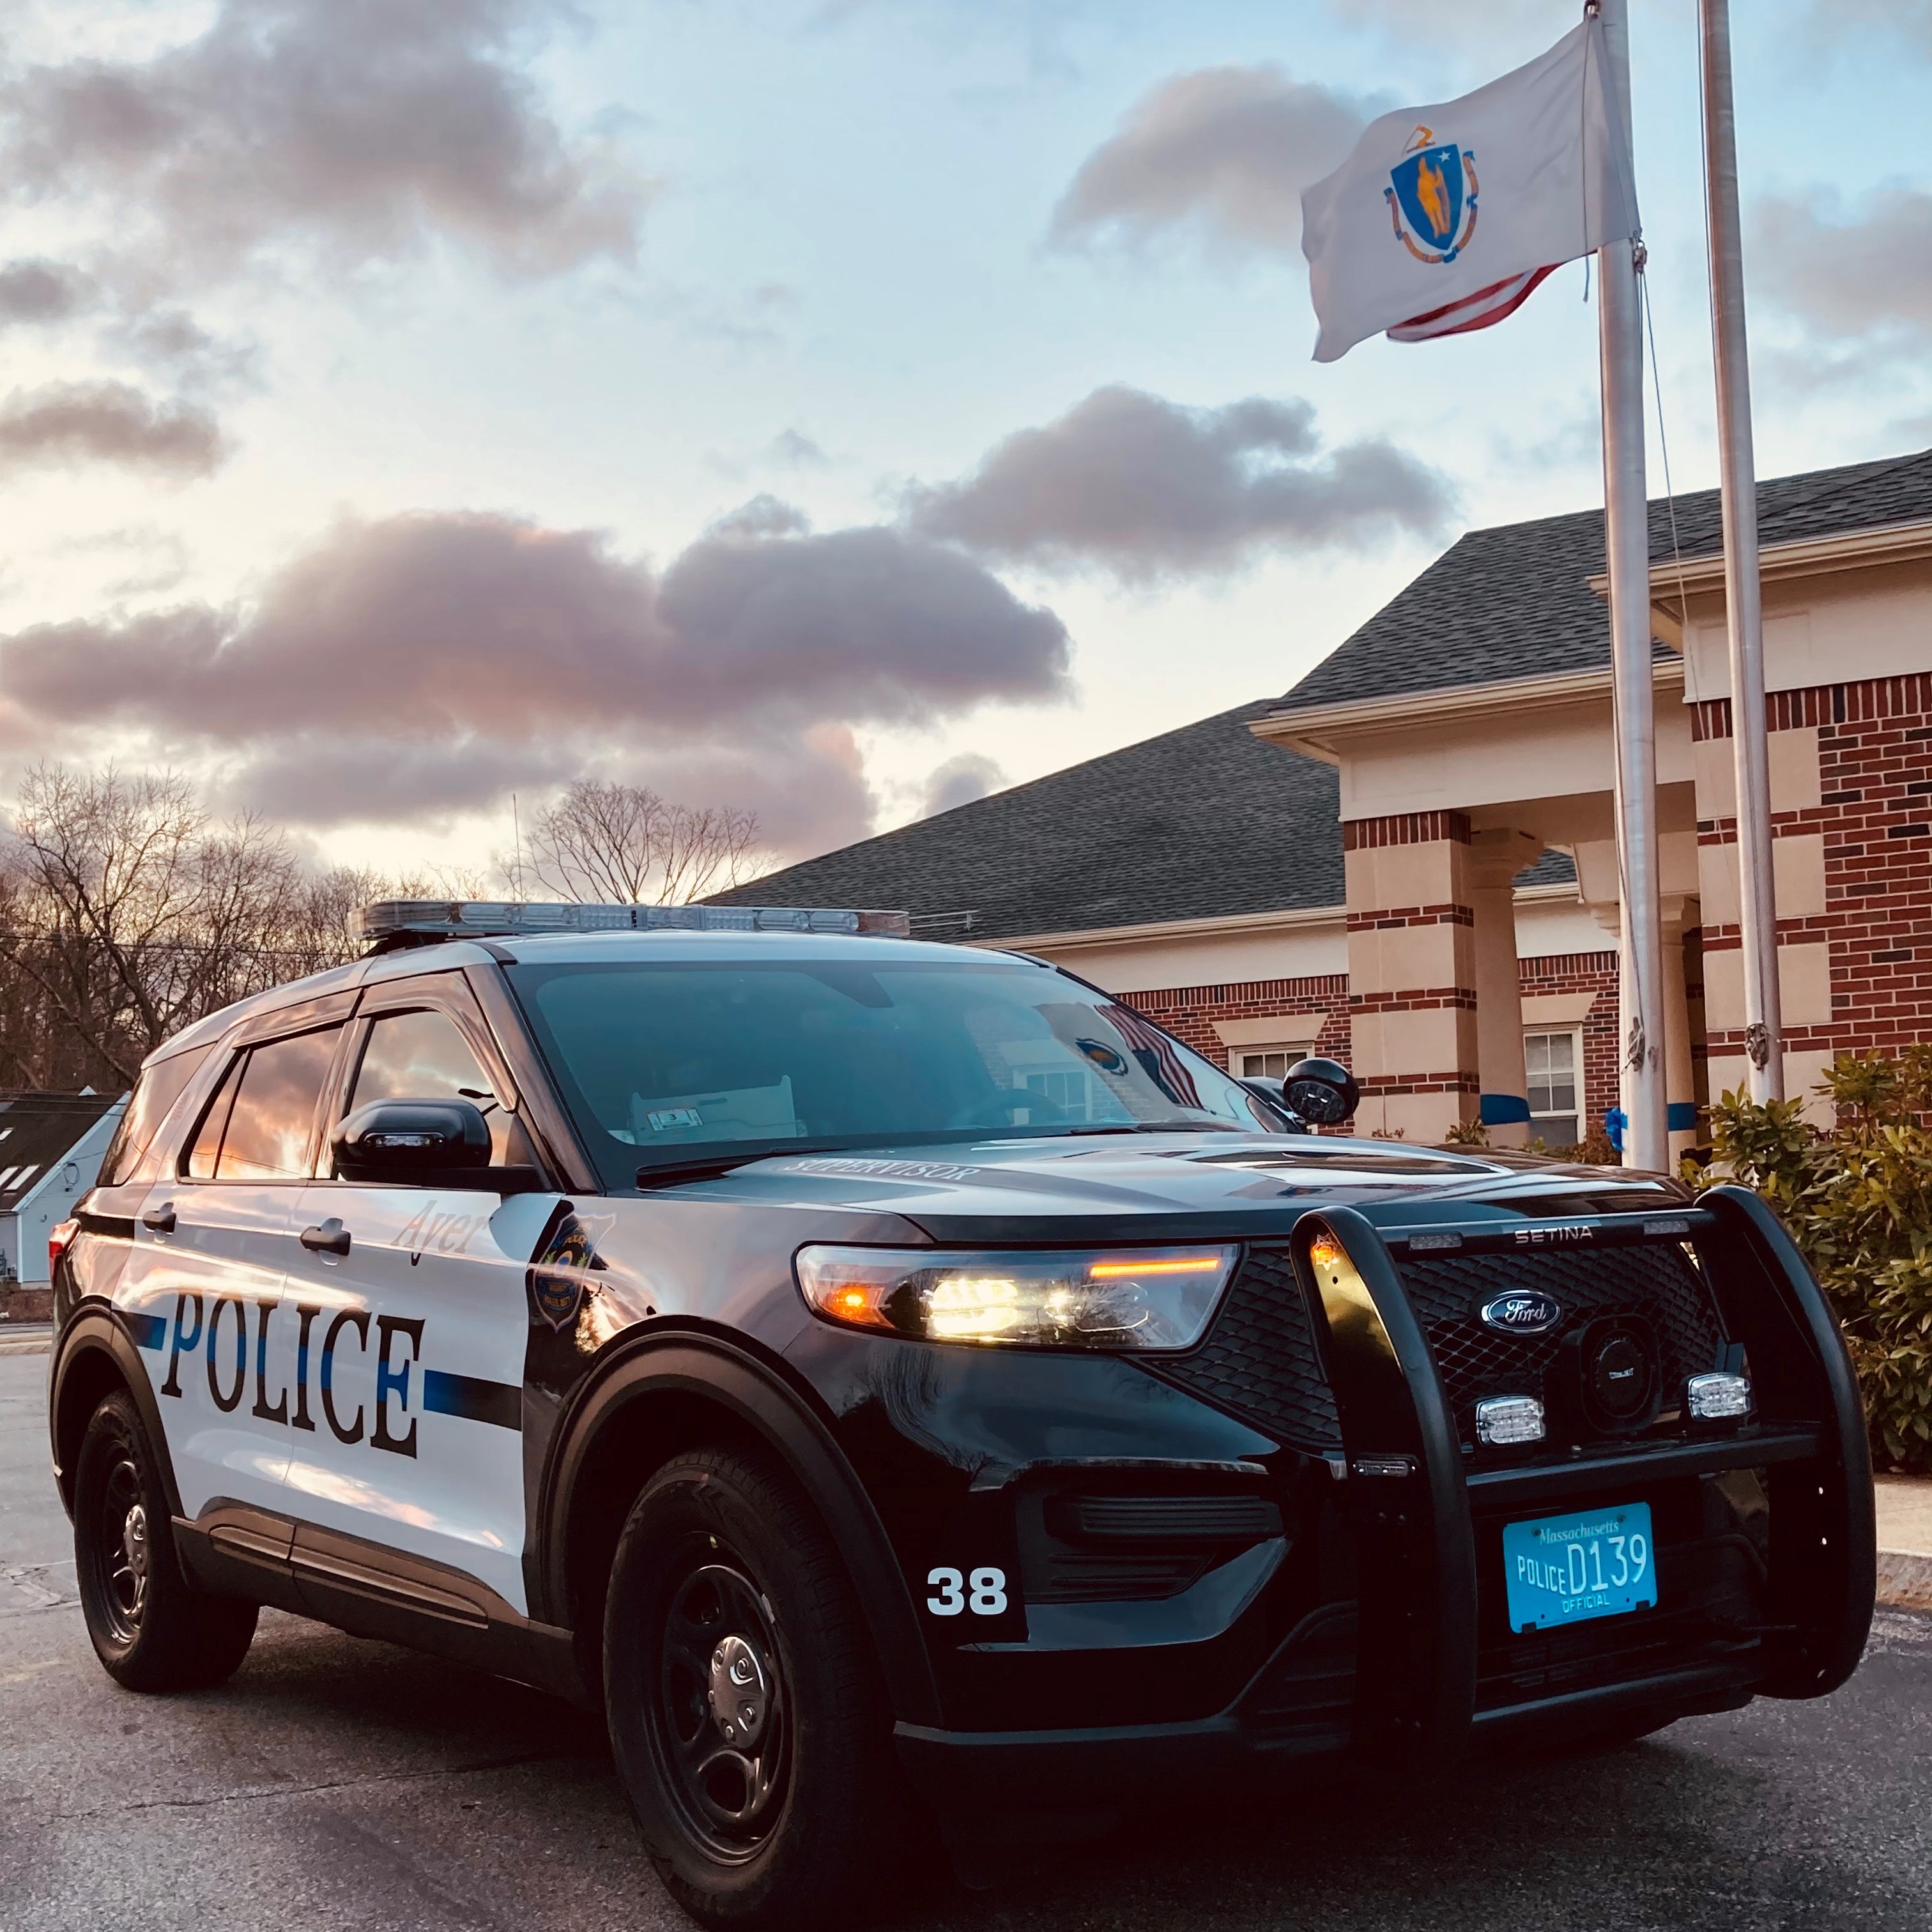 Ayer Police Department, MA Public Safety Jobs